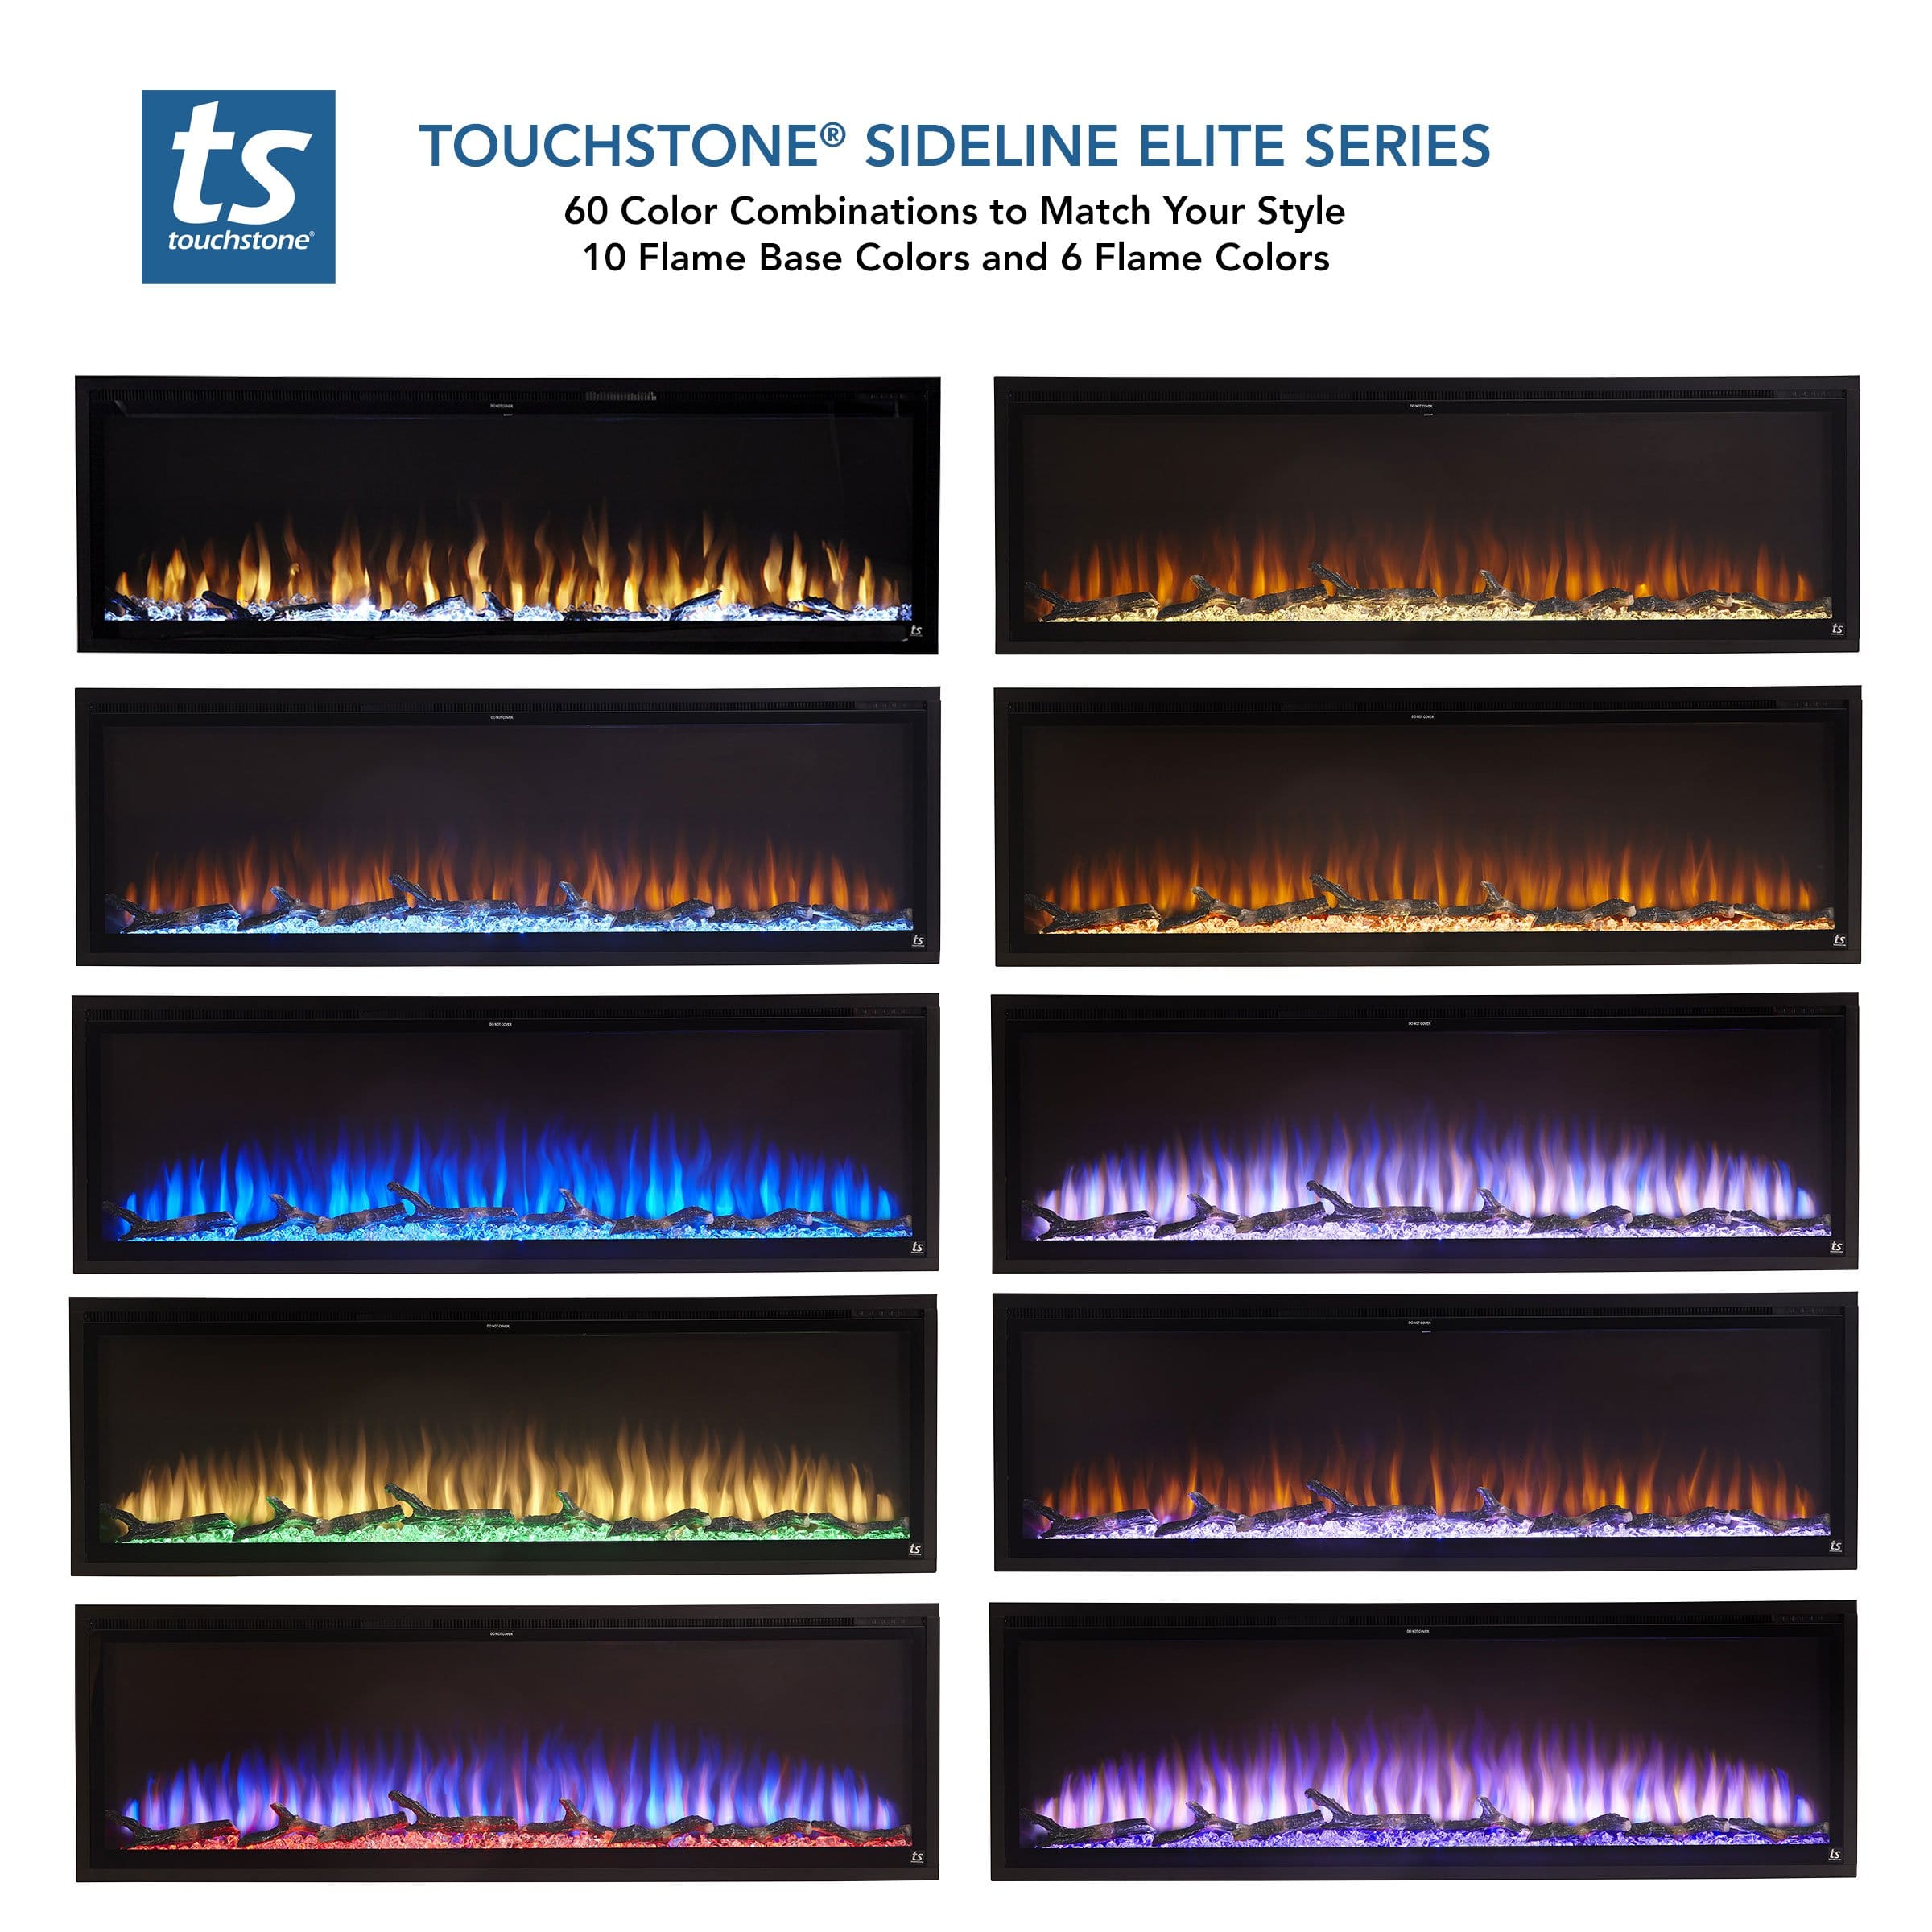 Touchstone Sideline Elite Electric Fireplace includes 60 flame color combinations